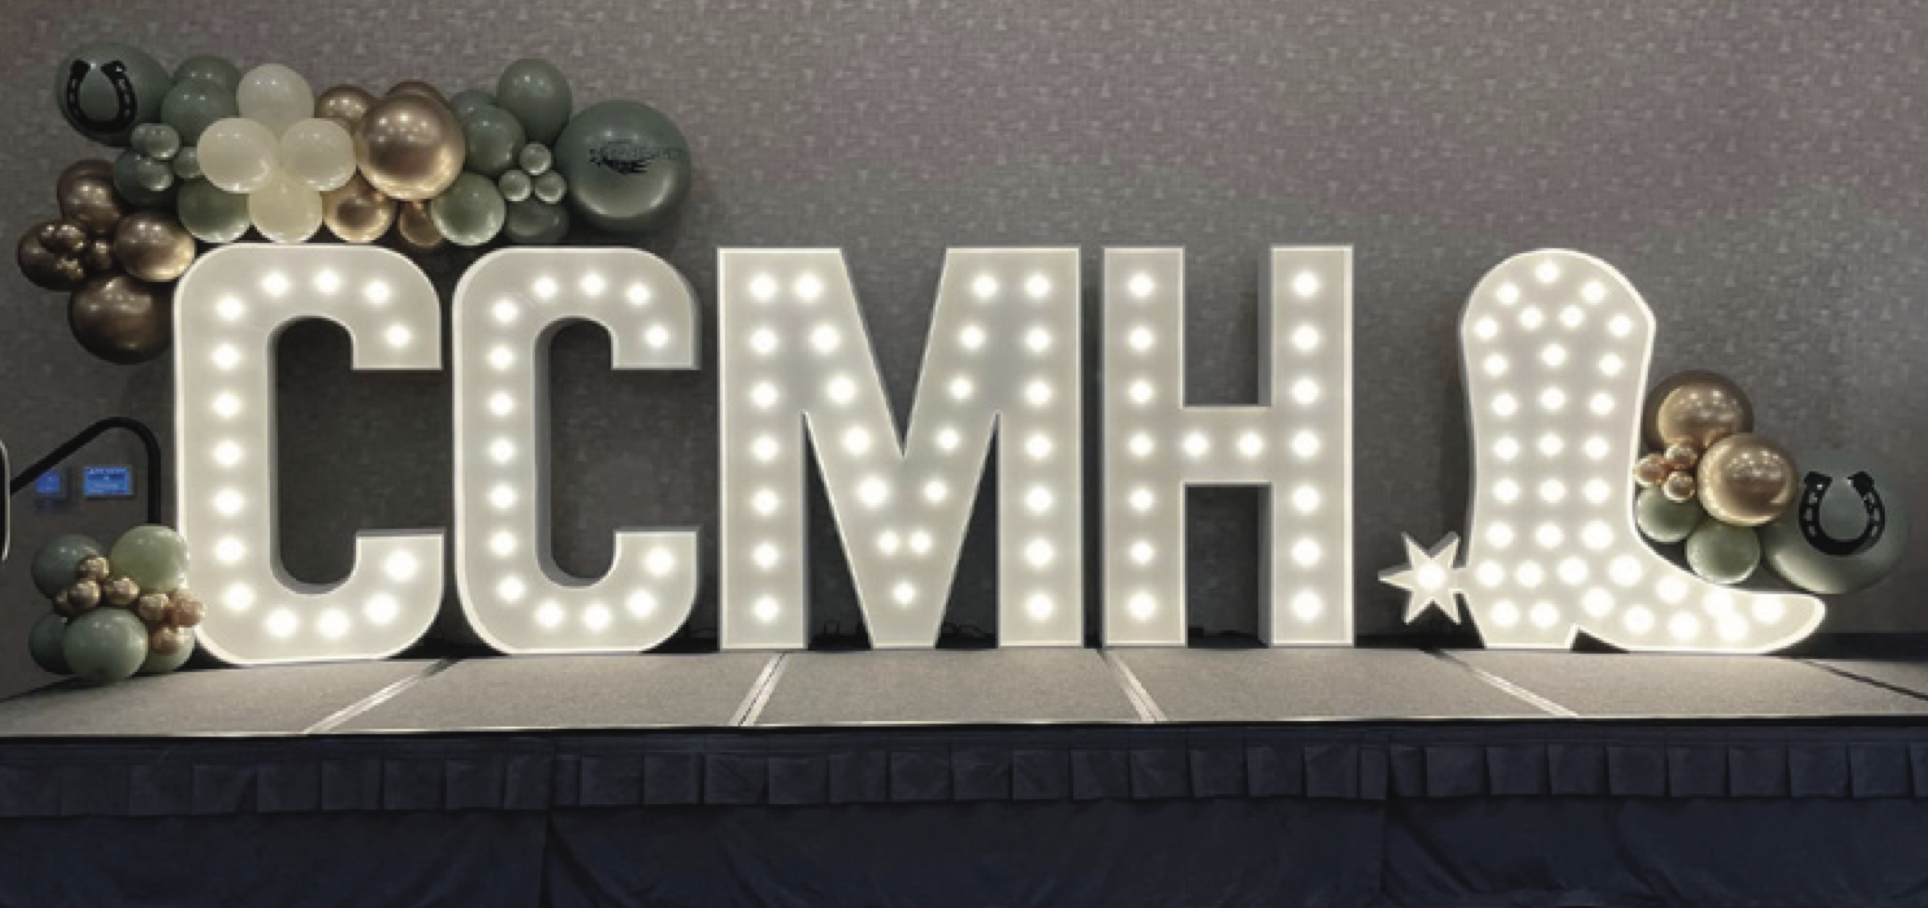 Decorated table with CCMH light letters